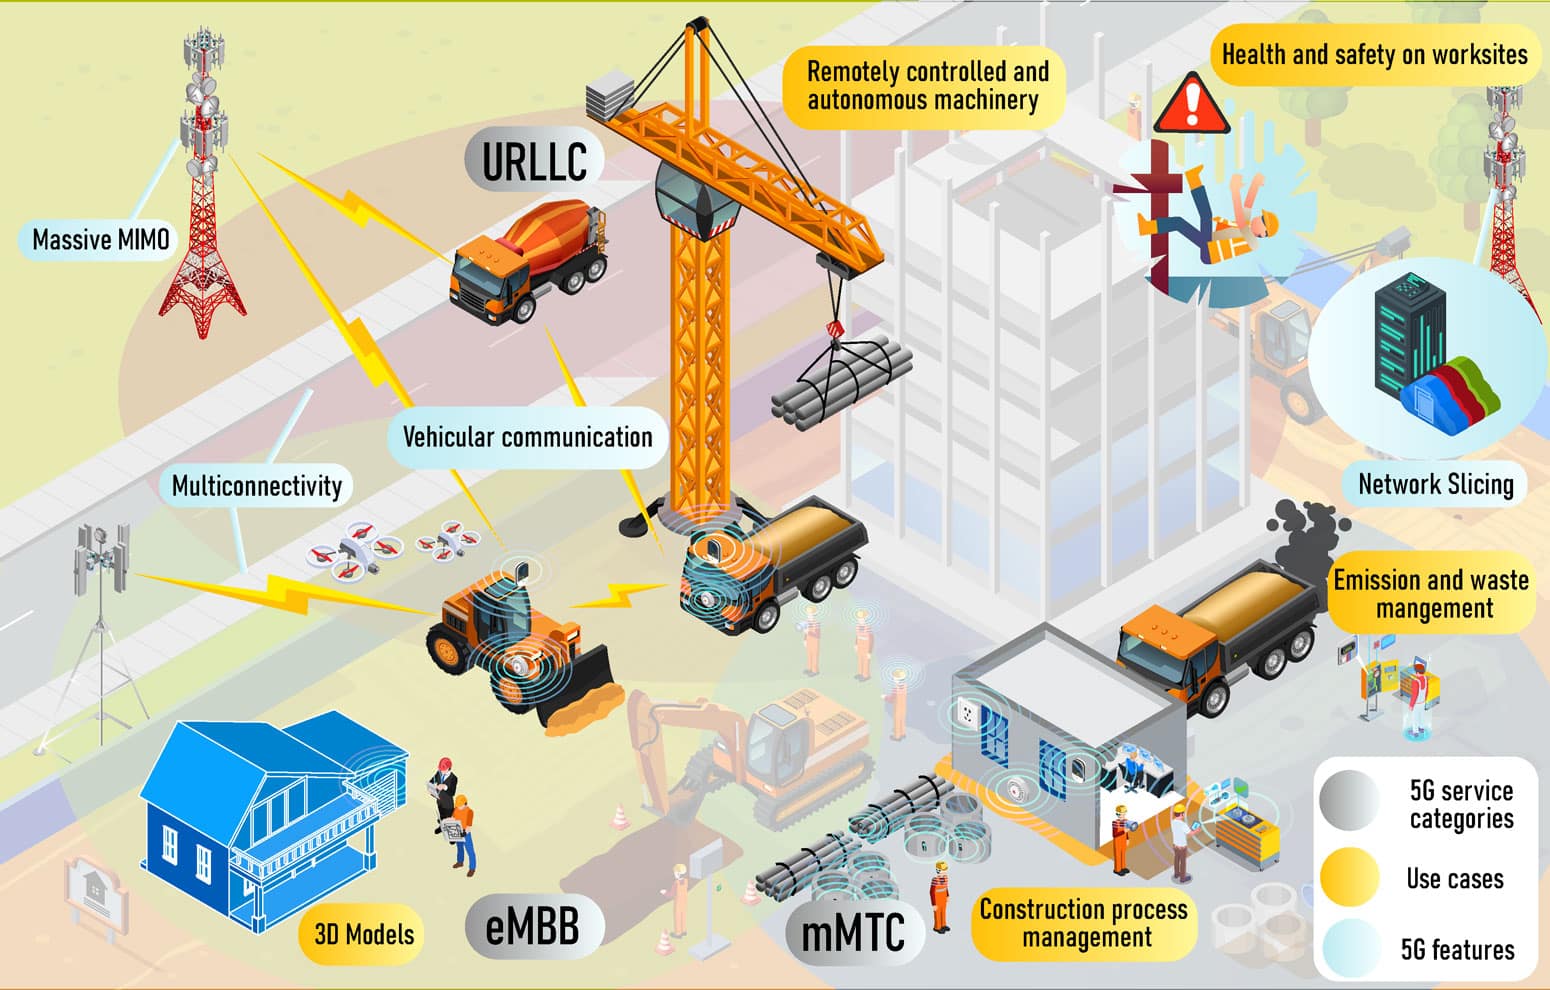 How 5G works on a construction site